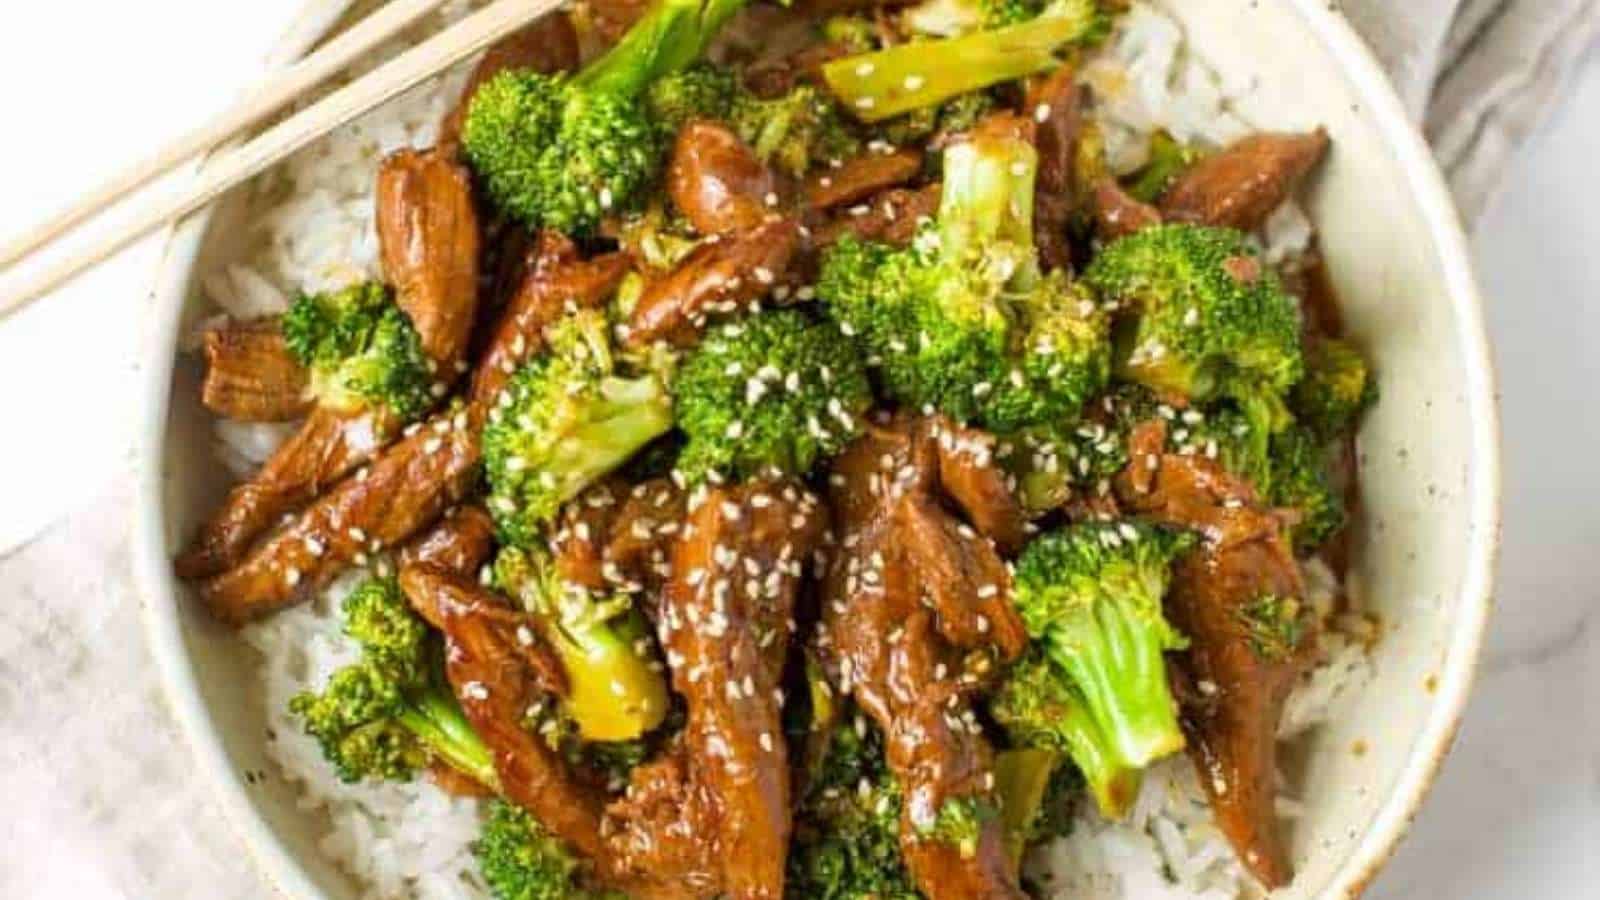 Beef and broccoli stir fry in a white bowl with chopsticks.